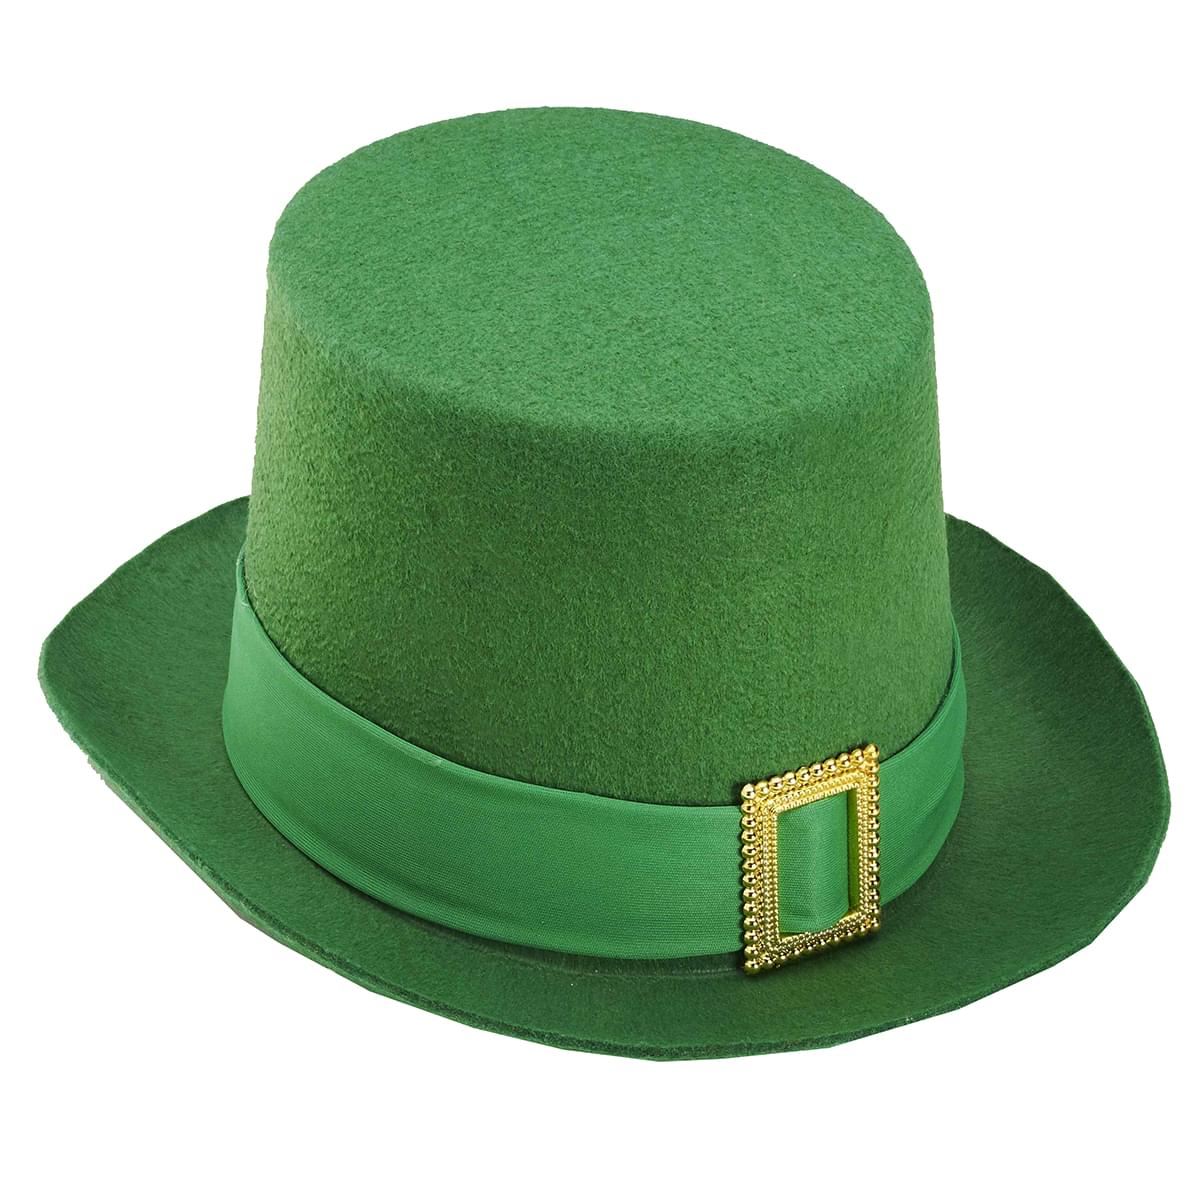 St. Patrick's Green Costume Top Hat w/Buckle Adult